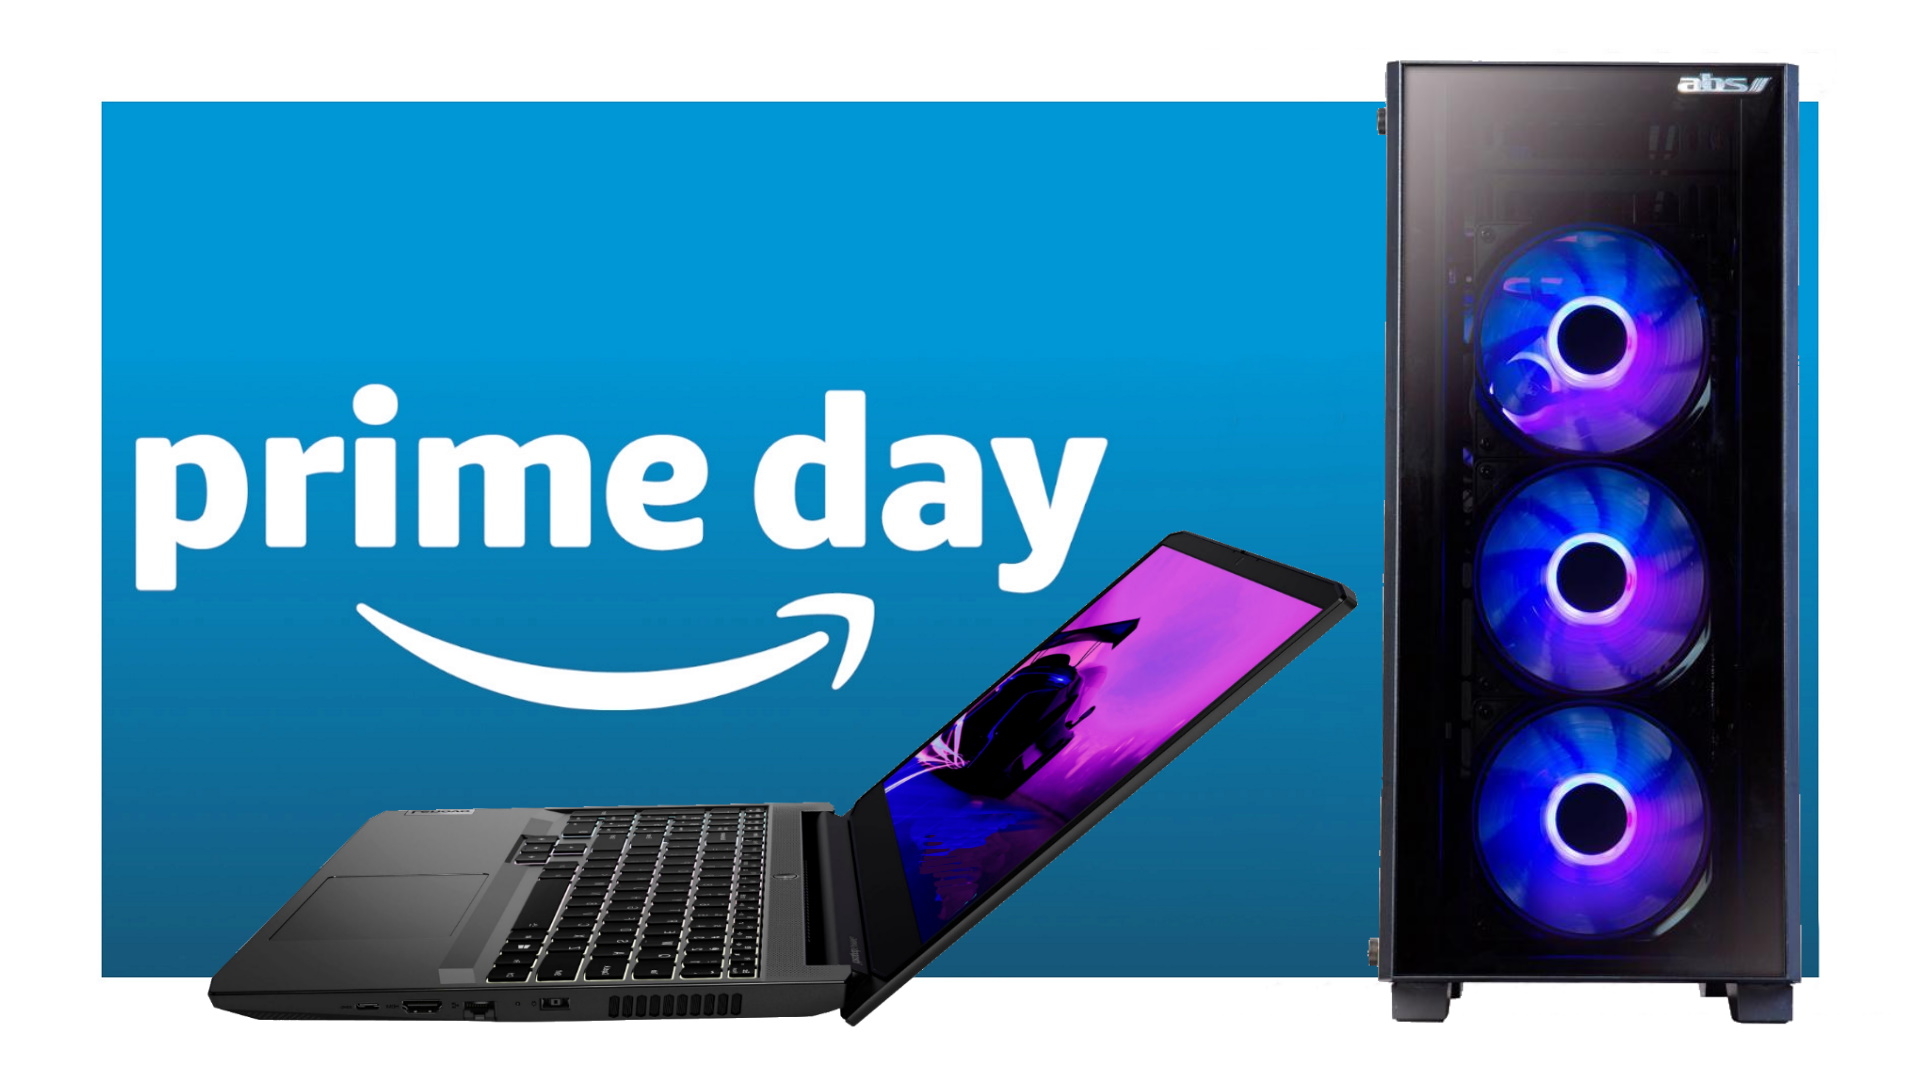 8 Amazon Prime Benefits You Need to Know Heading into Prime Day